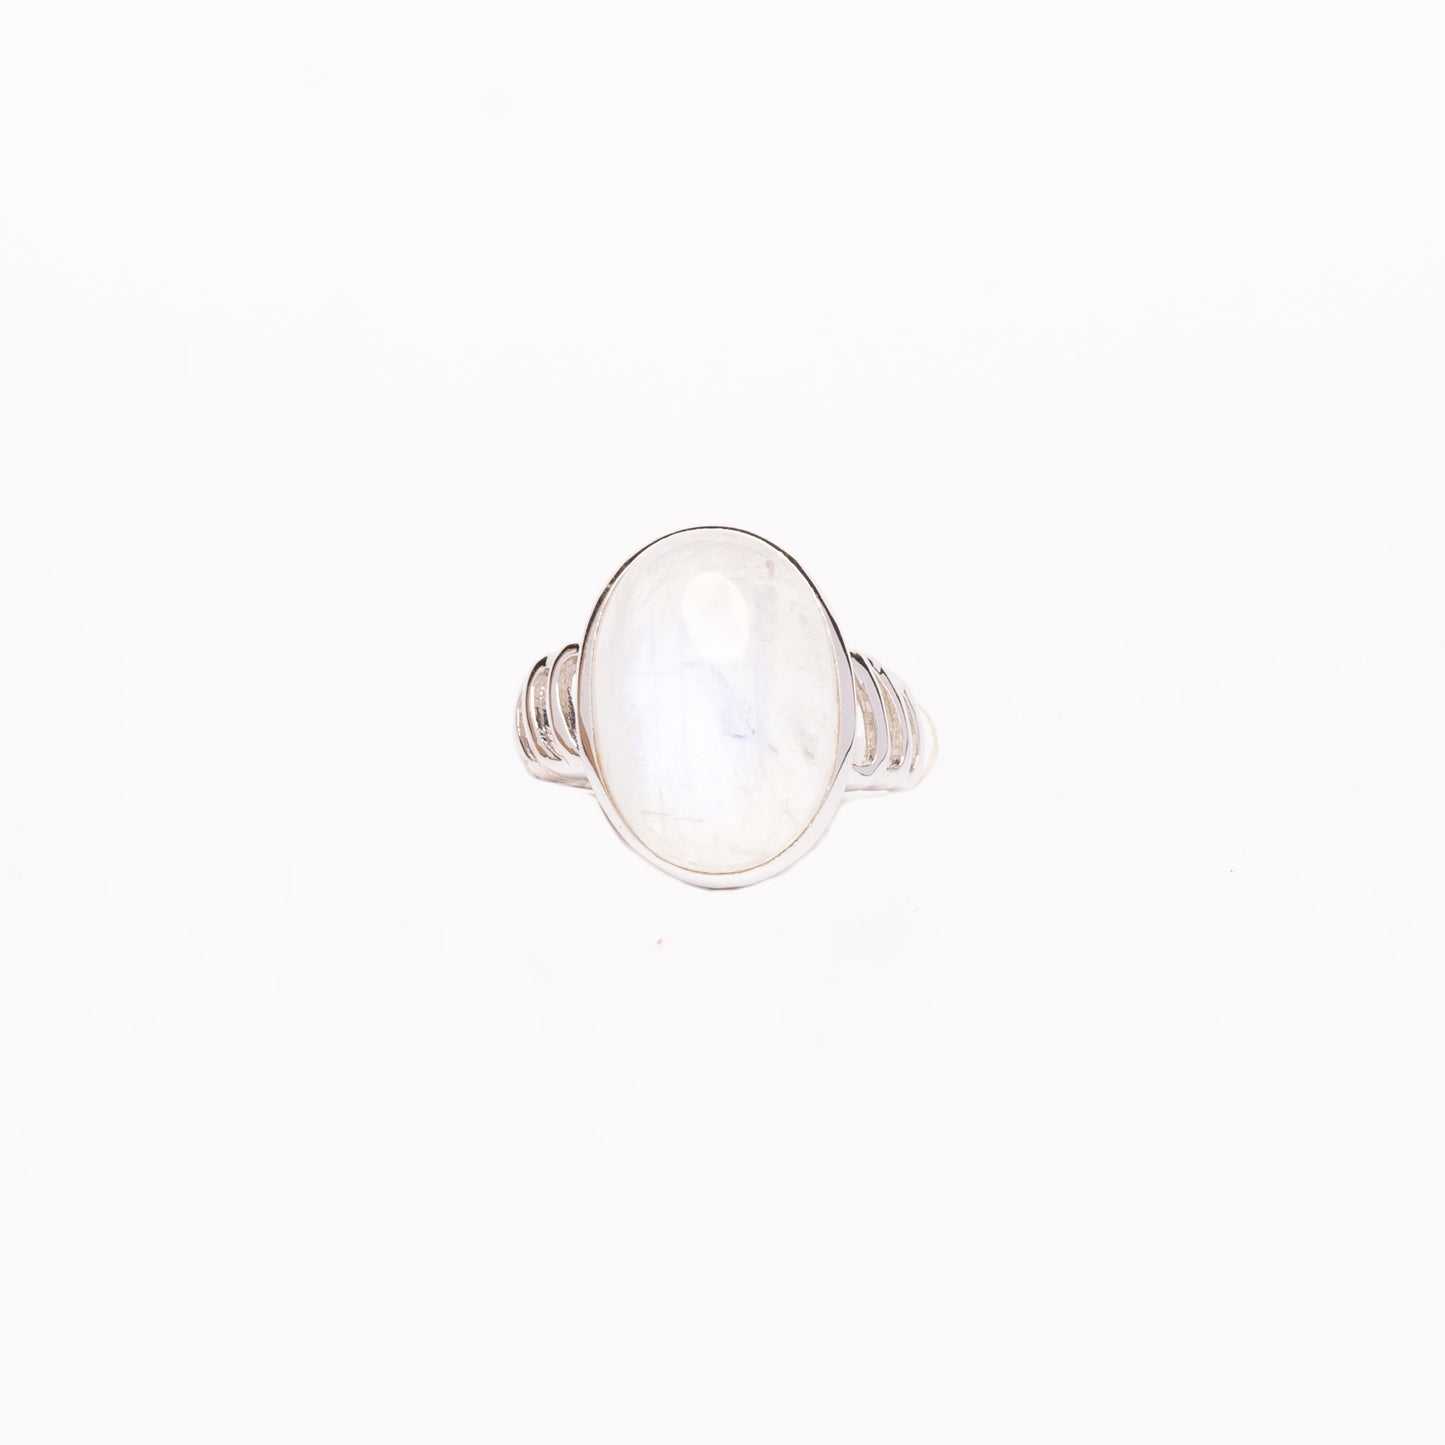 Oval Moonstone Cabochon Ring